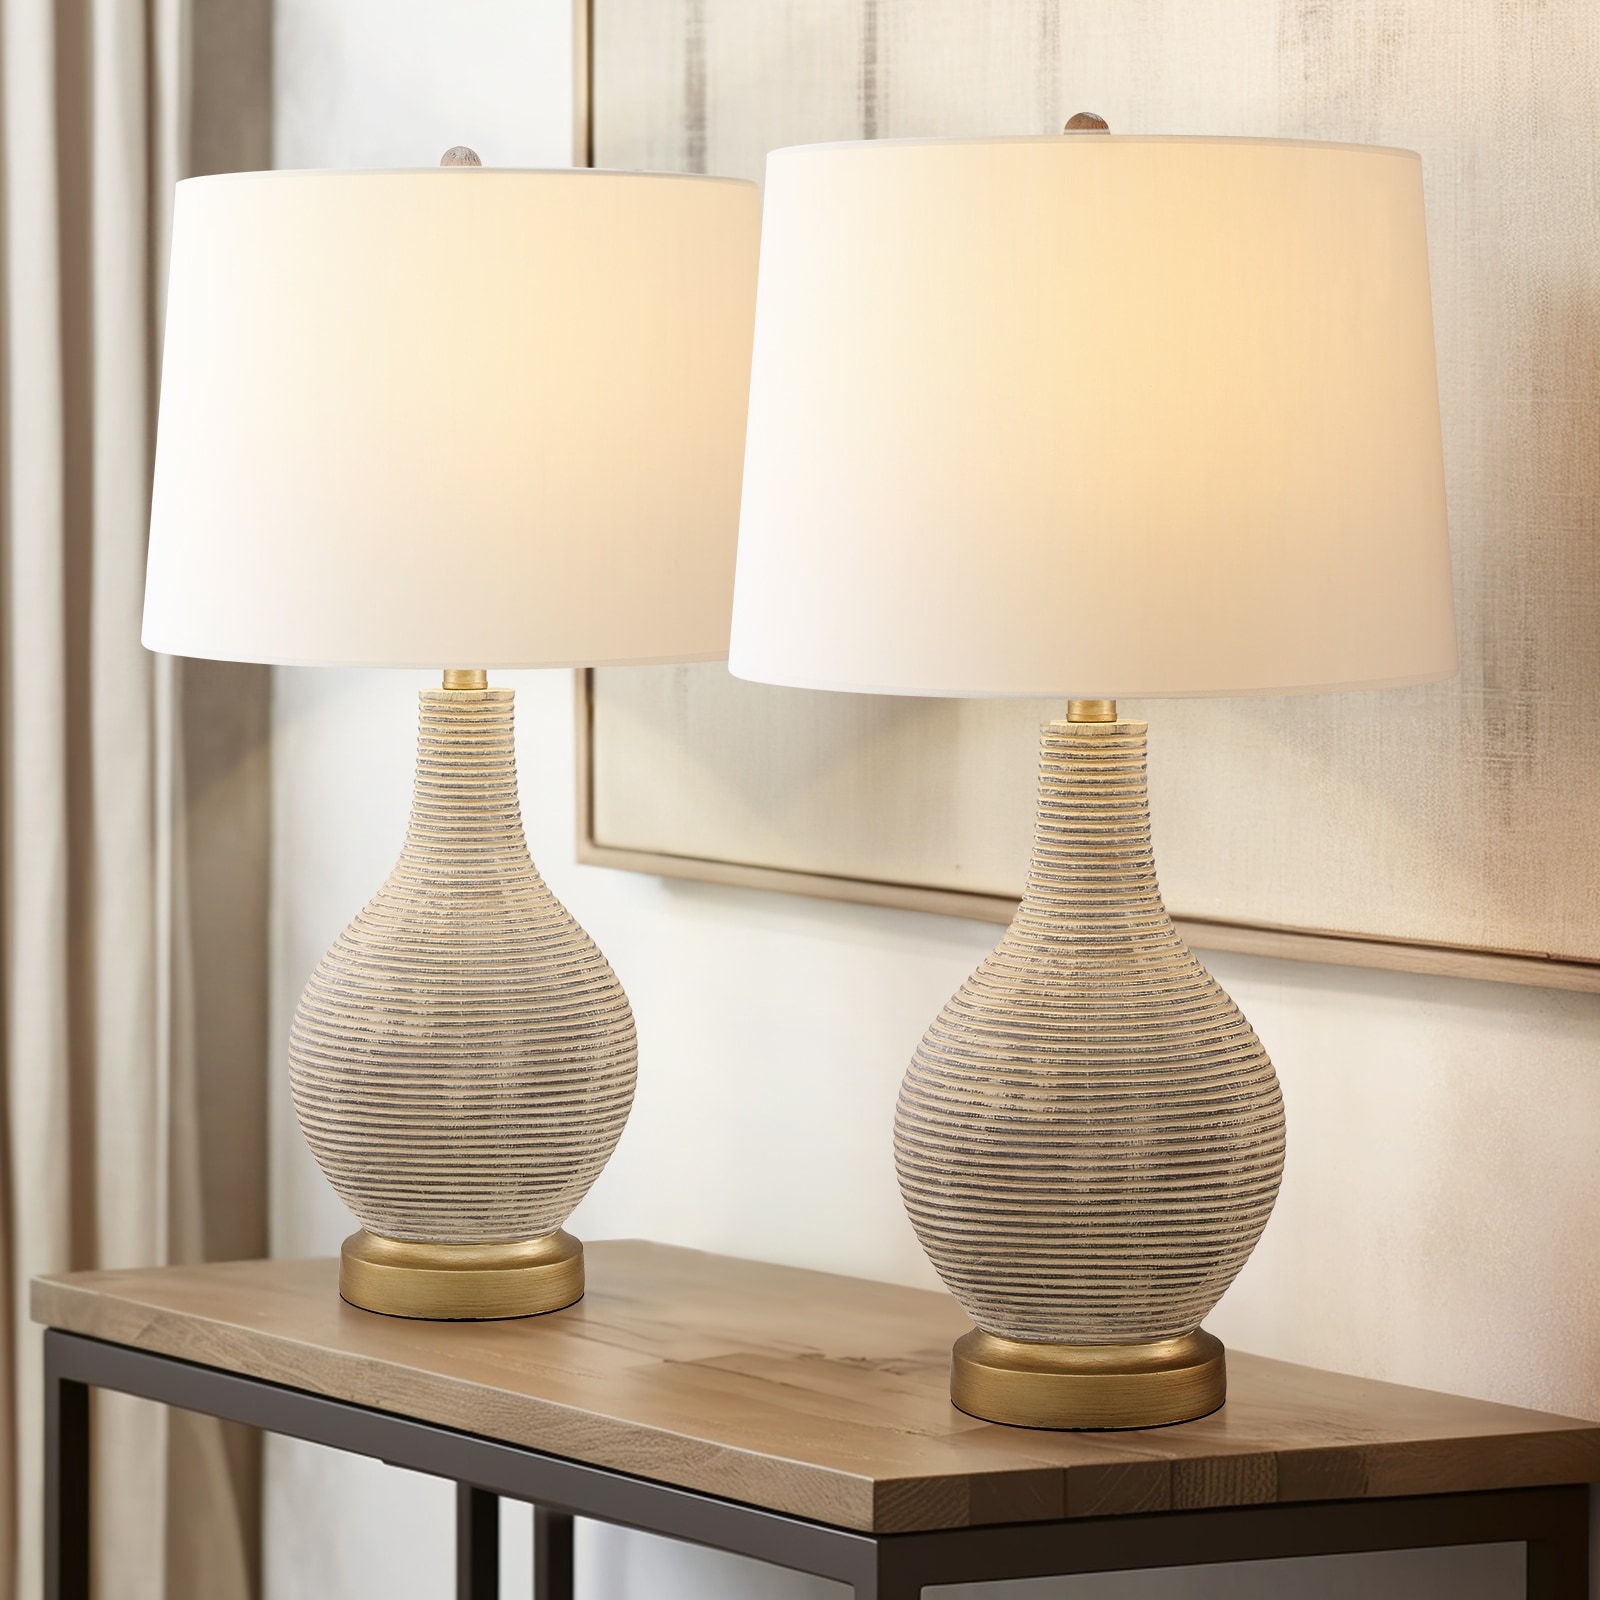 24.5-inch Washed Beige/Gold Farmhouse Table Lamp with White Linen Shade (Set of 2)